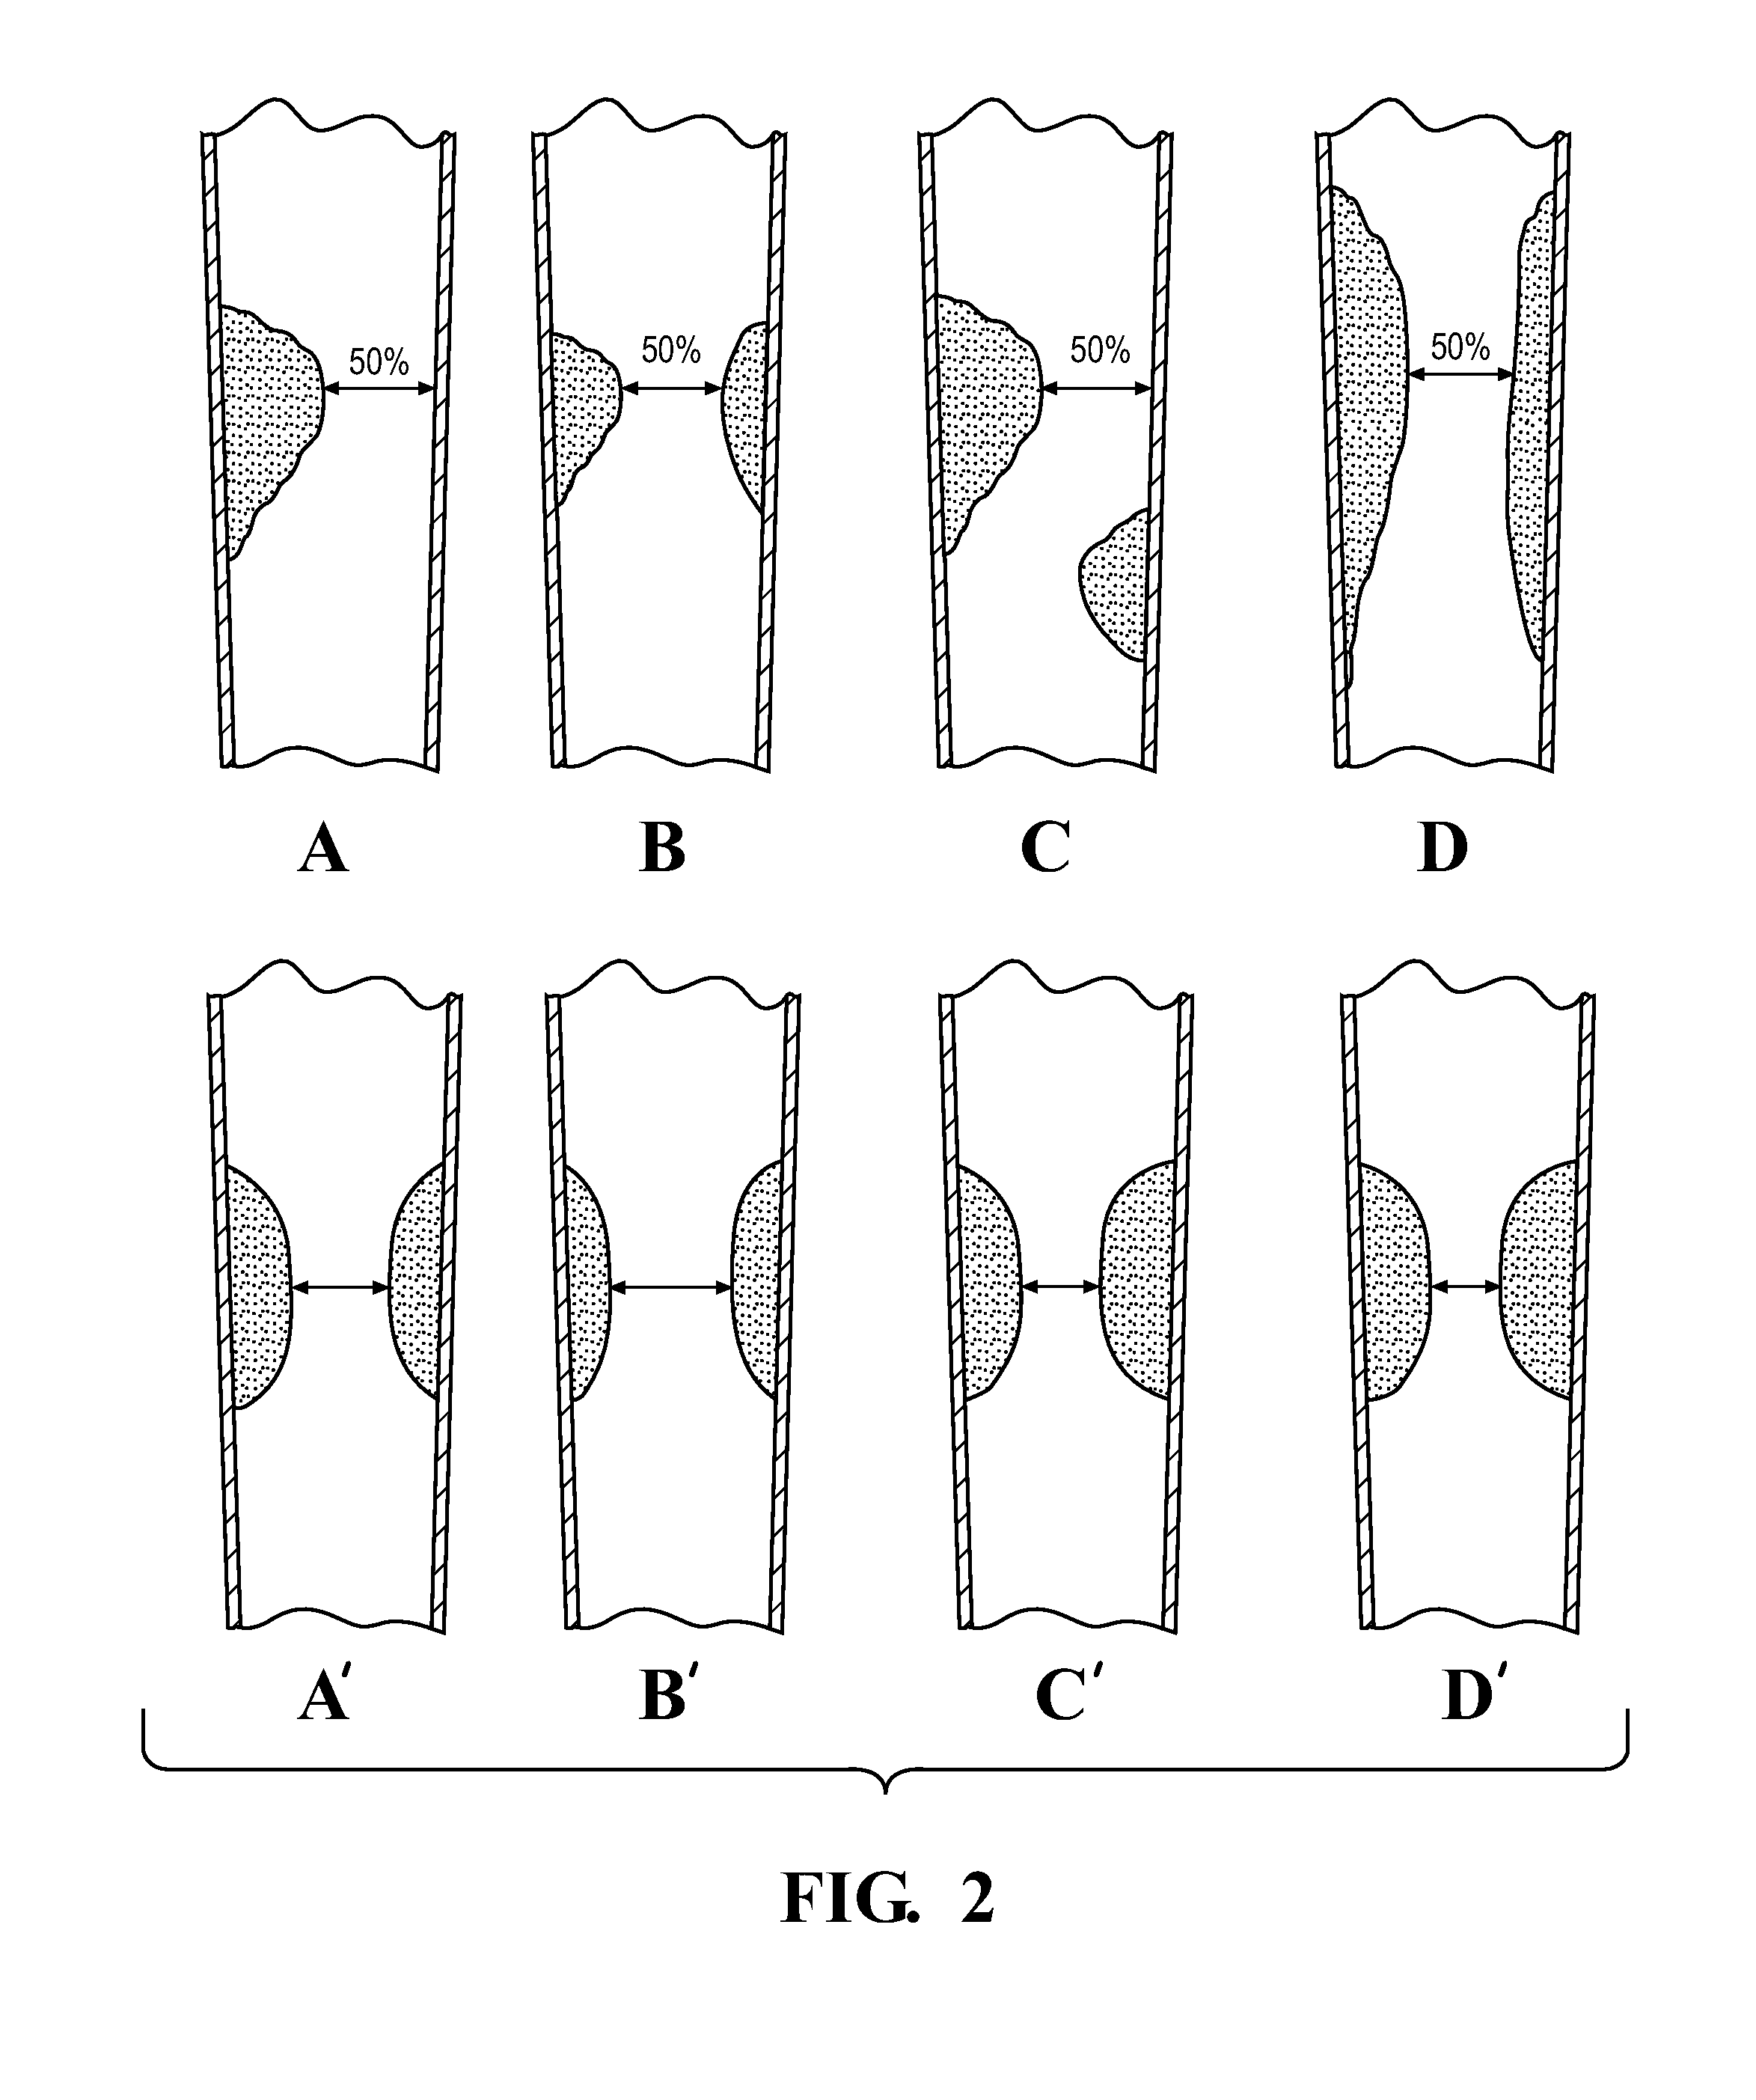 Method for assessing stenosis severity through stenosis mapping